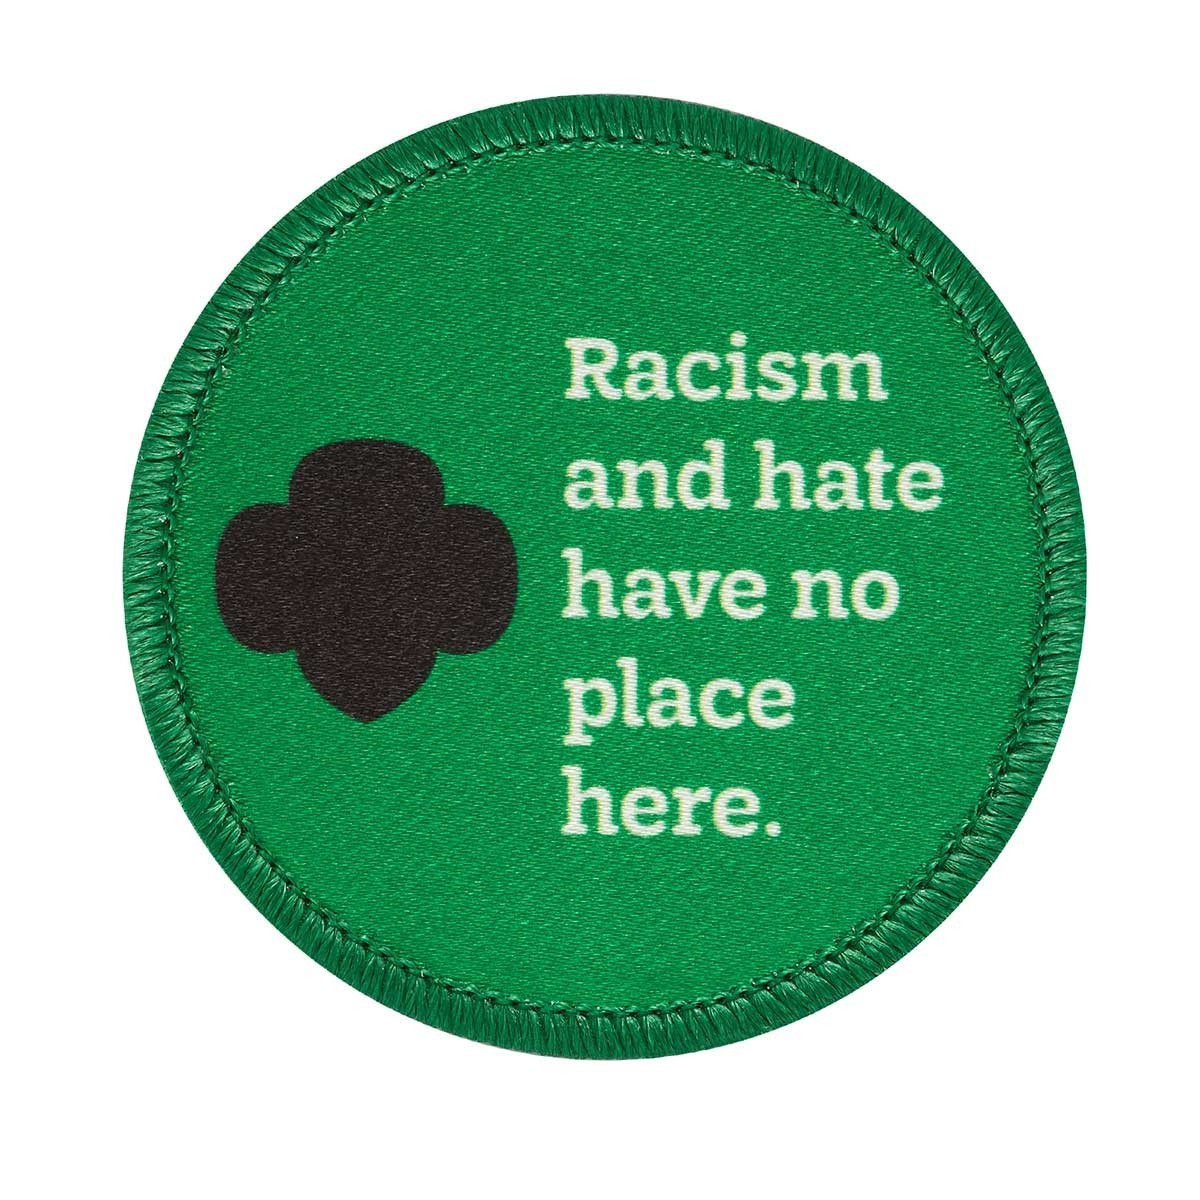 Green with black trefoil and Racism and hate have no place here.